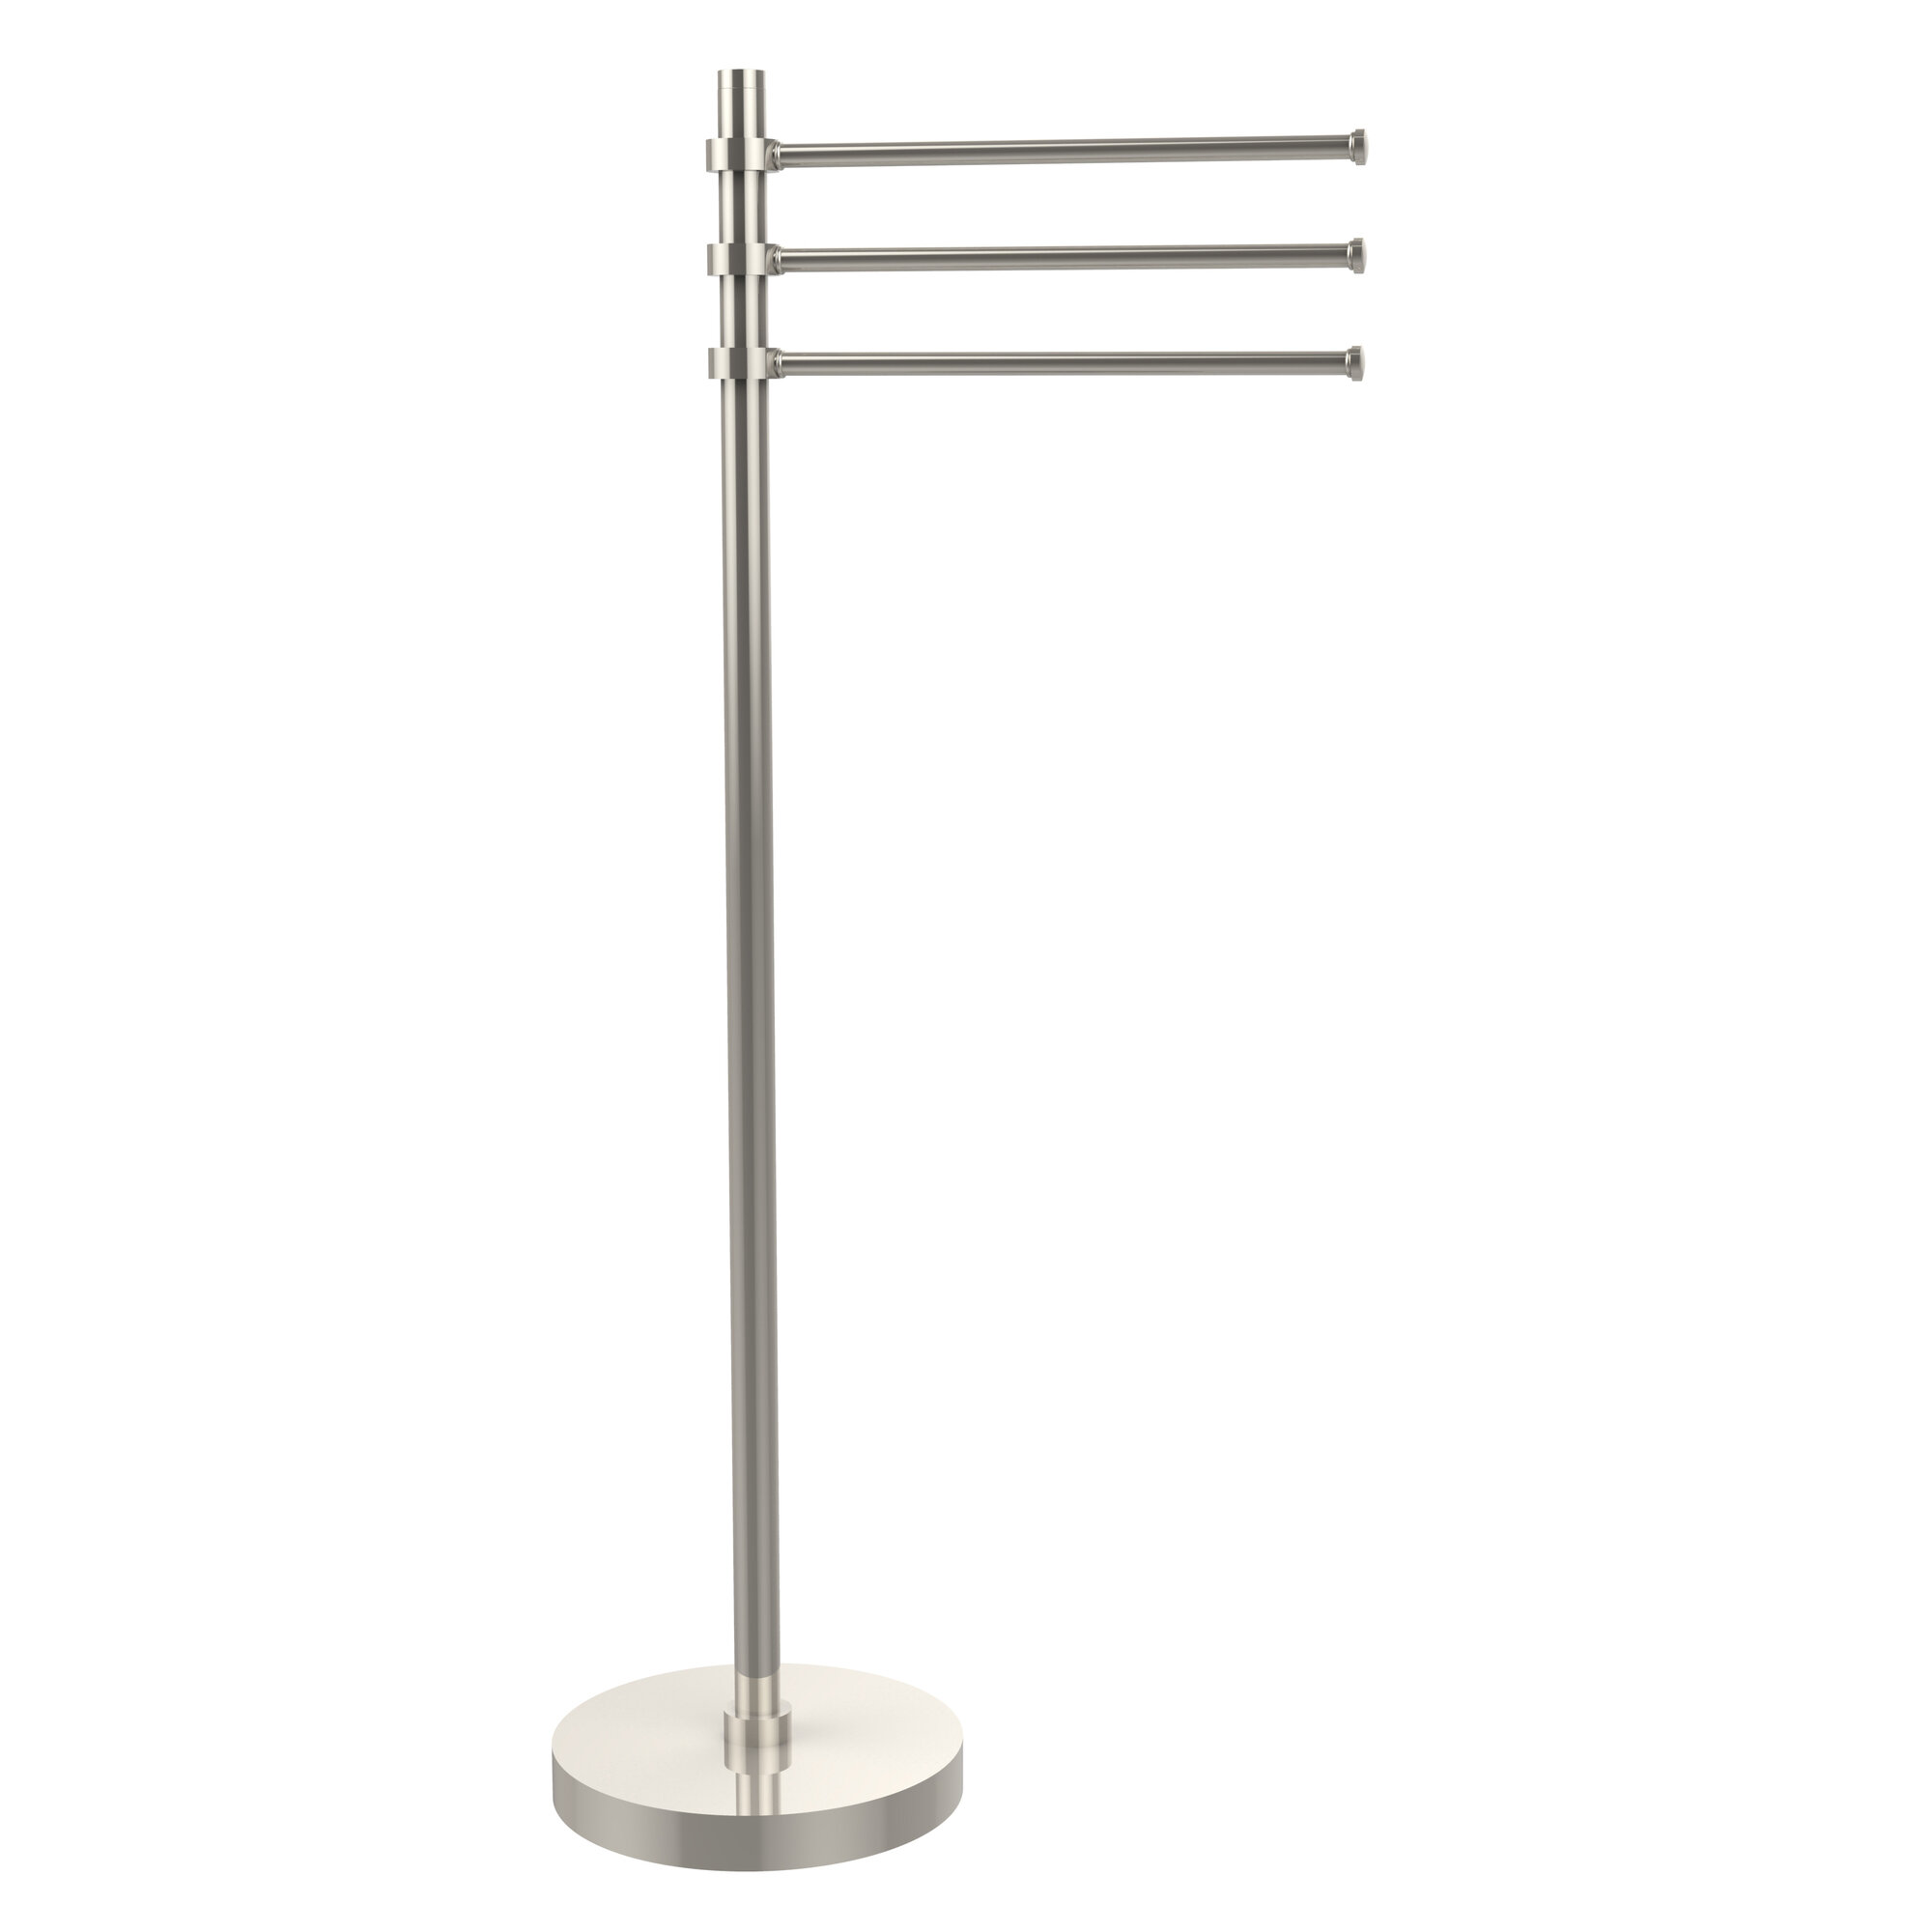 Allied Brass Universal Free Standing Towel Stand Polished Nickel | eBay